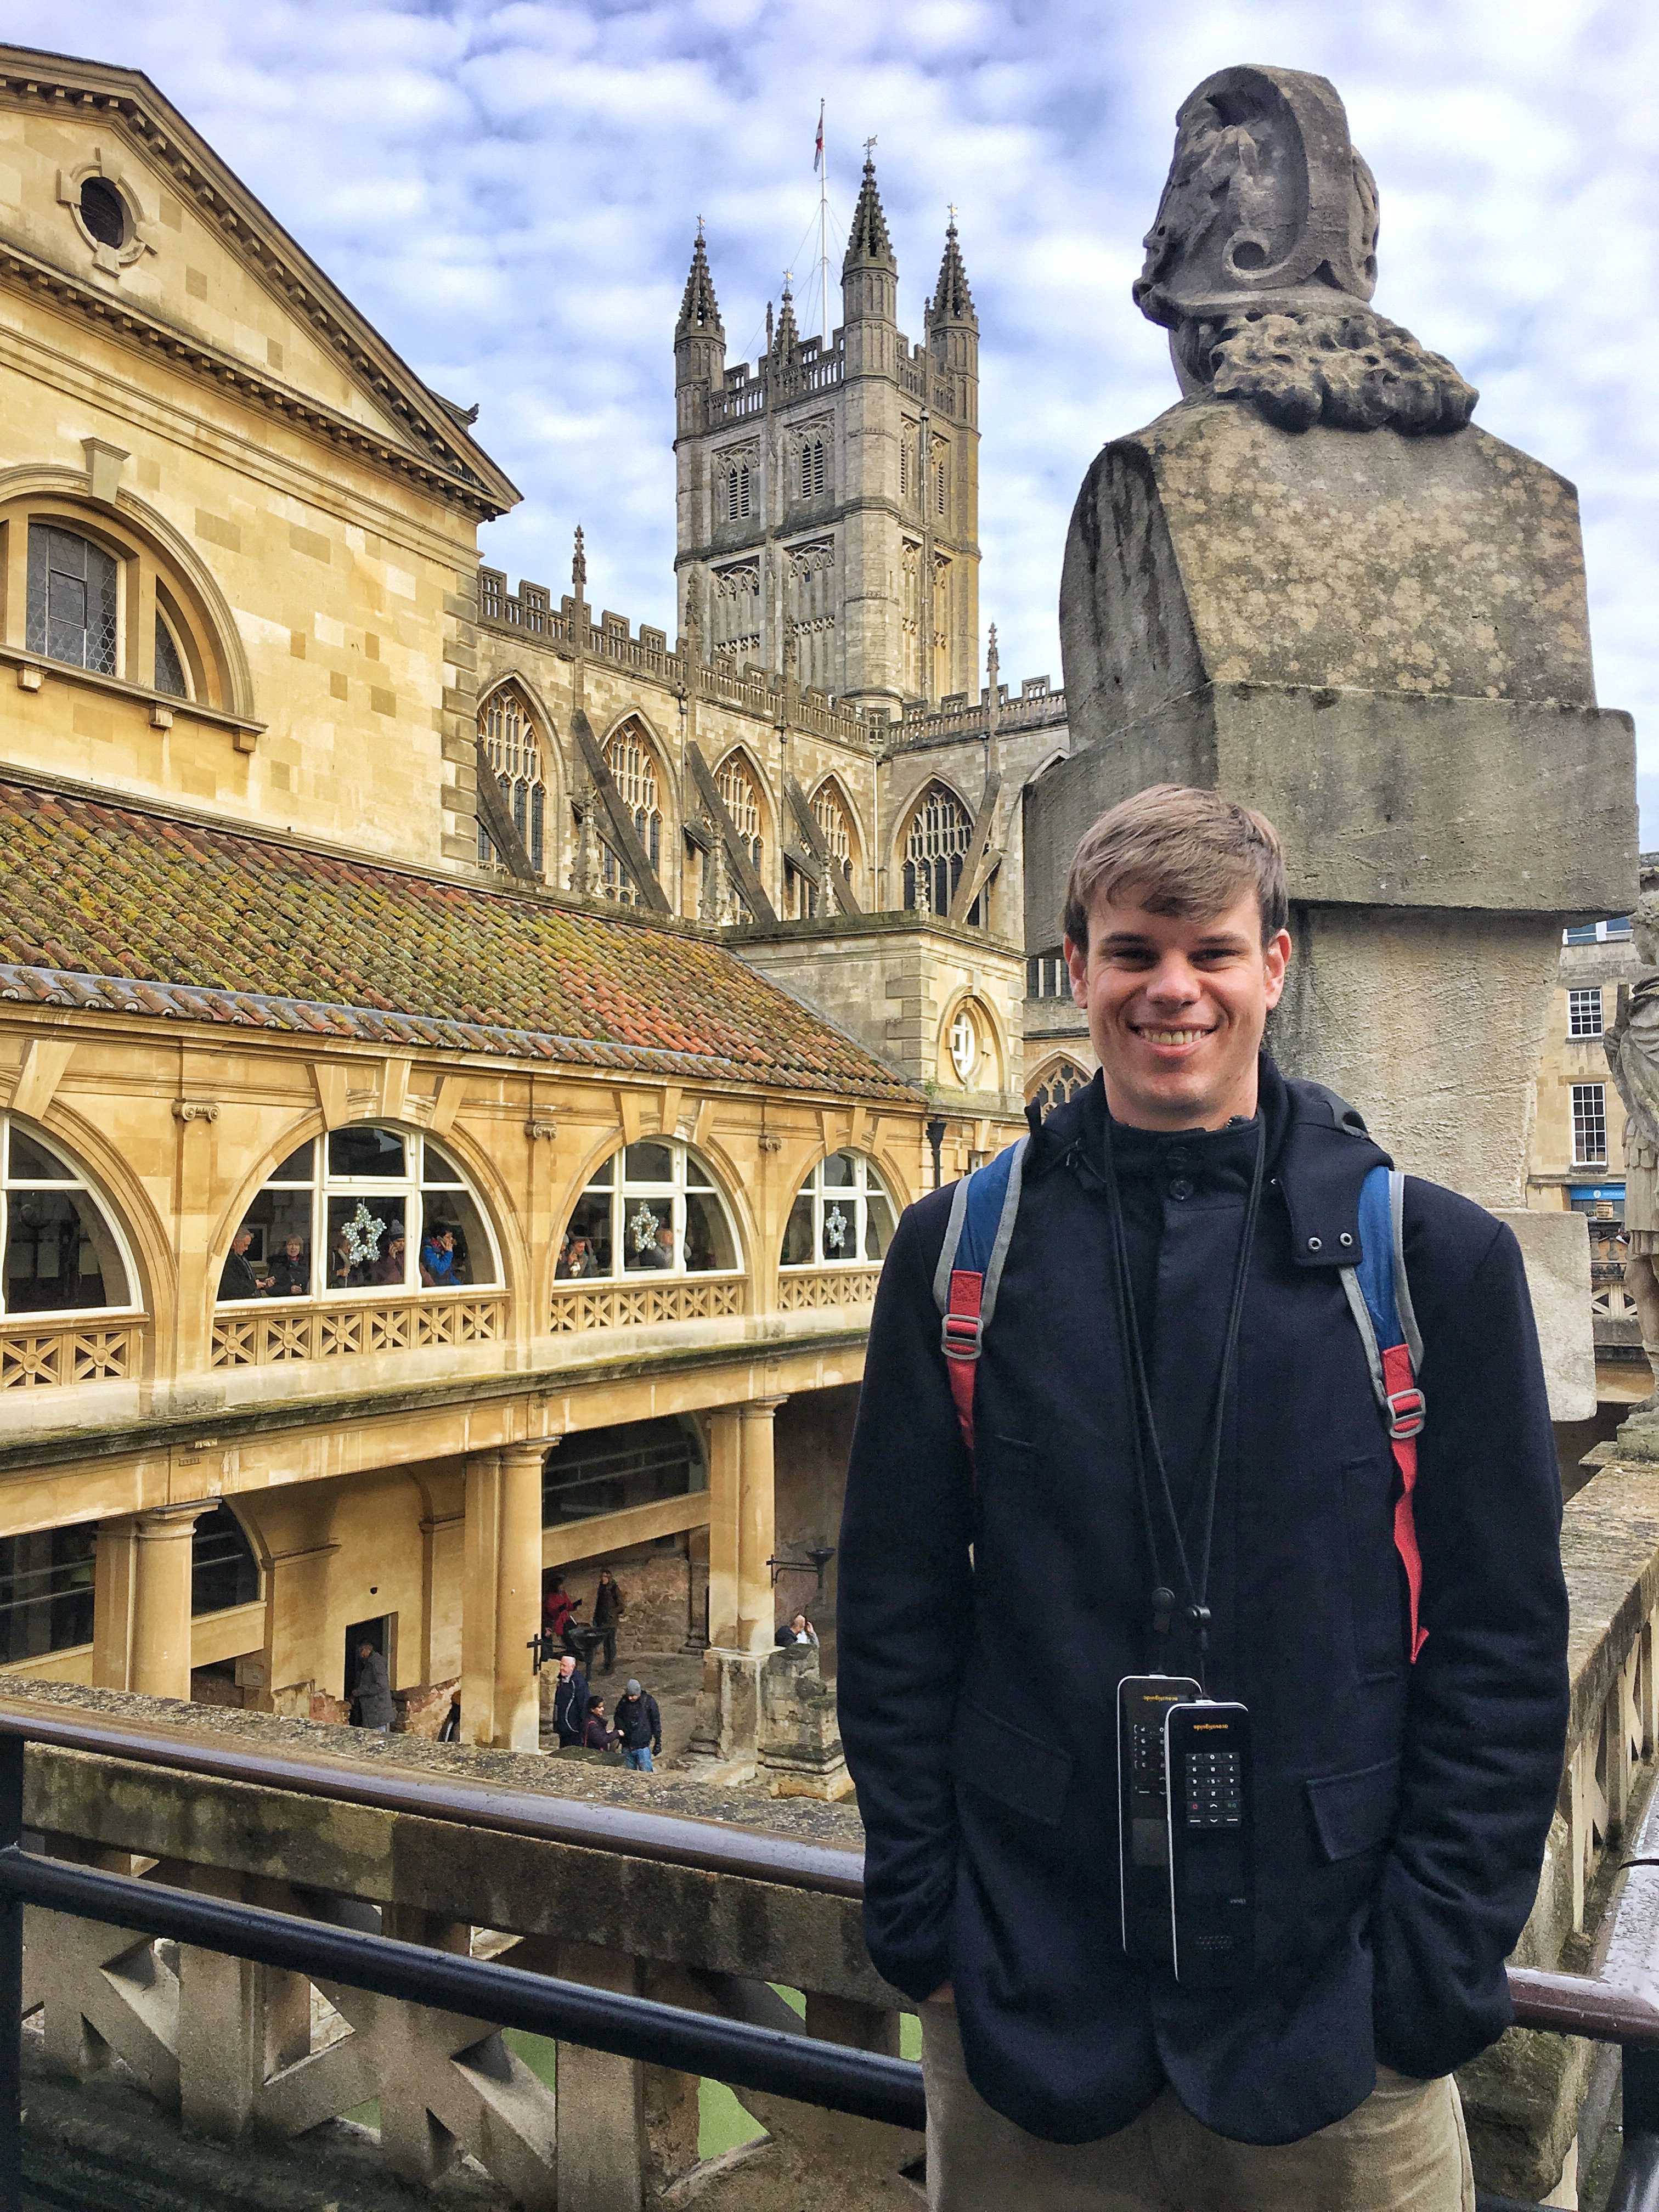 Kevin at the Ancient Roman Baths in Bath England